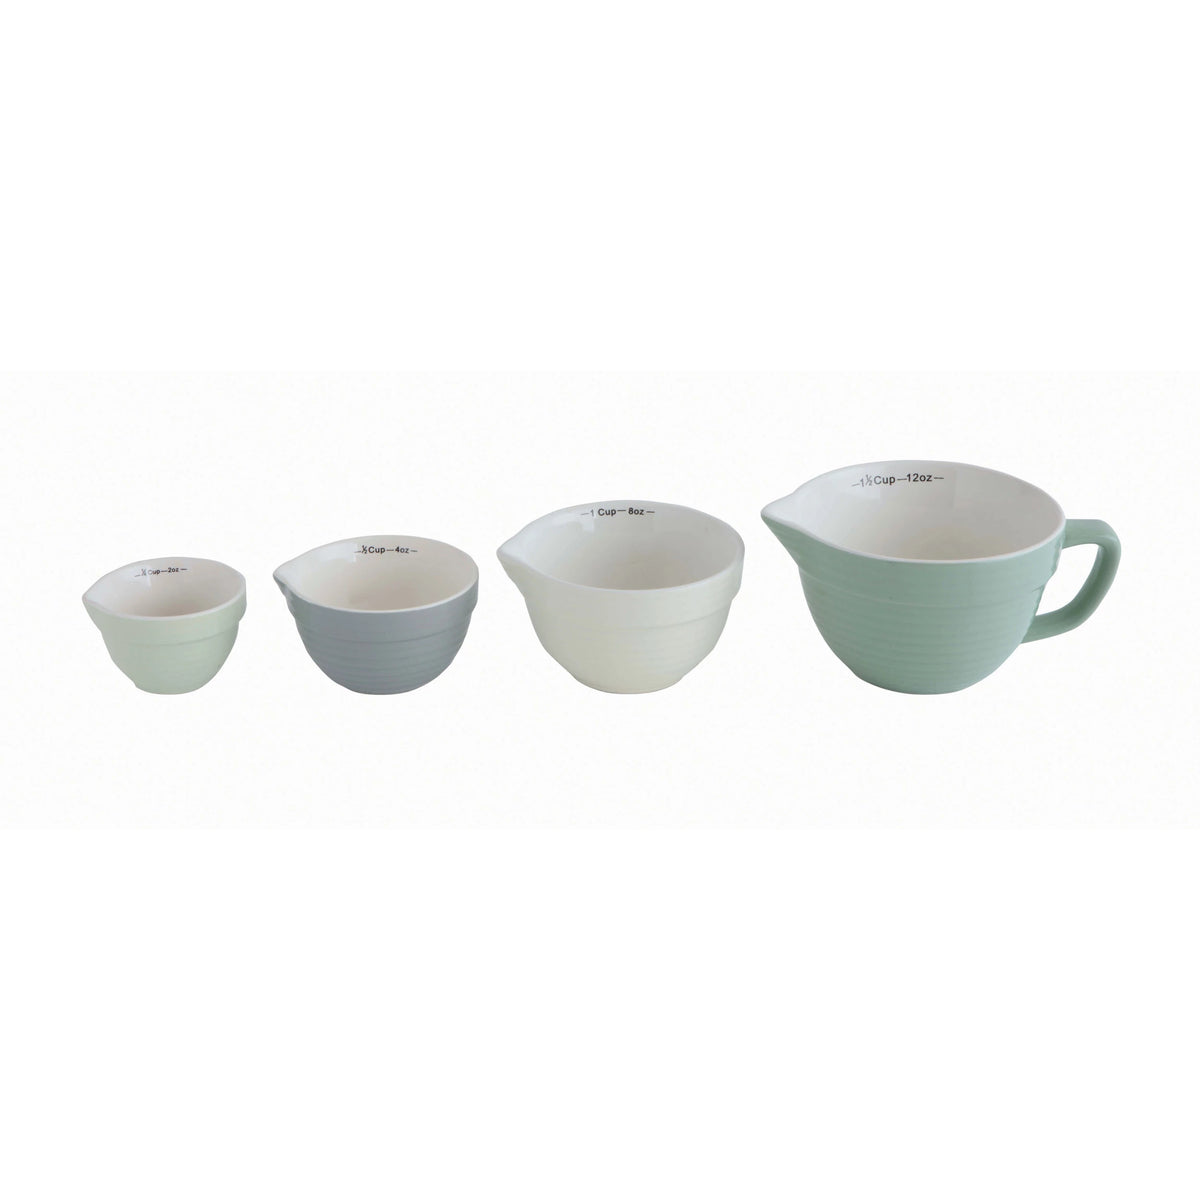 1-1/2, 1, 1/2, 1/4 Cup Stoneware Batter Bowl Shaped Measuring Cups, Set of-Decor-Lemons and Limes Boutique